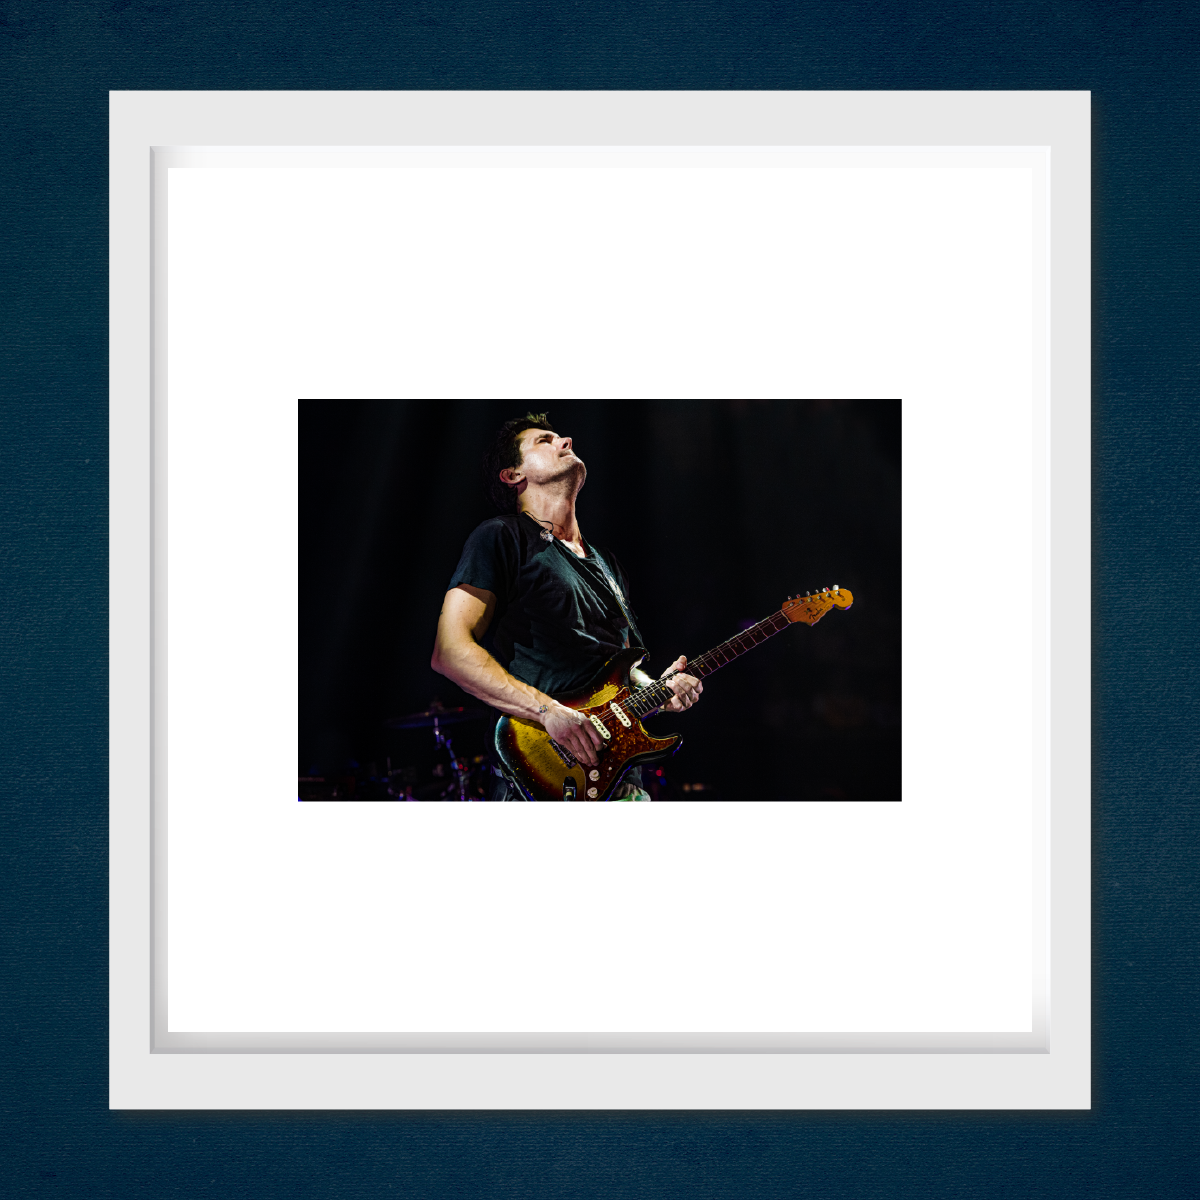 john mayer - forever in me - the forum, inglewood, ca, september 13, 2019 - 12 x 12 inch limited edition print